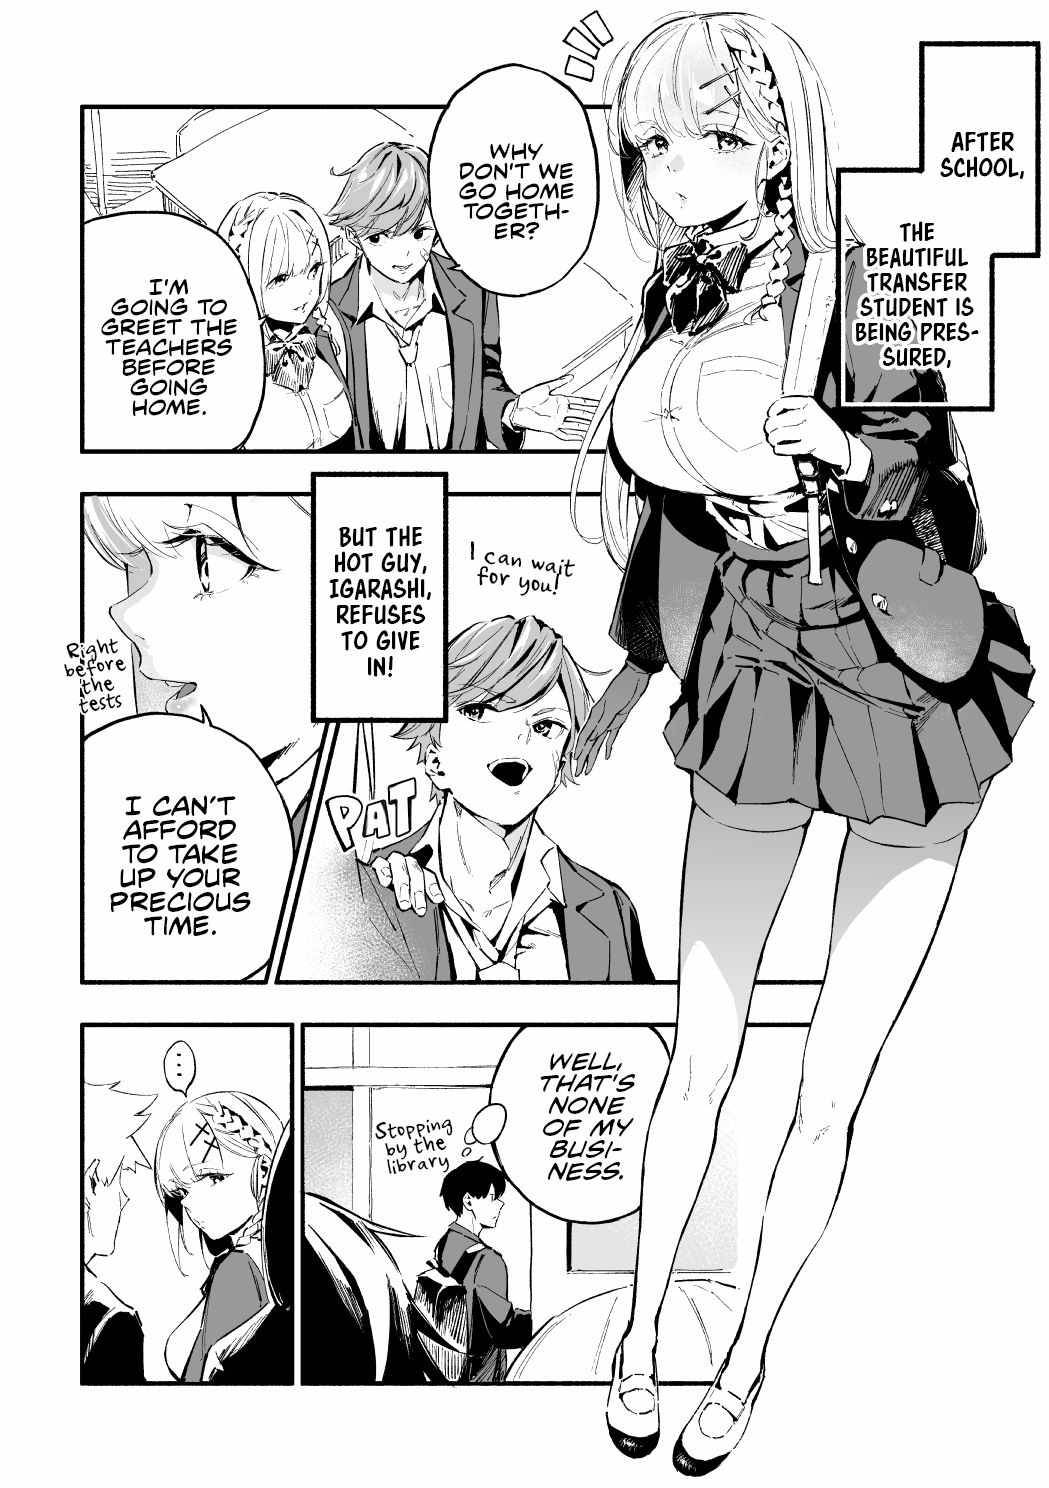 The Angelic Transfer Student and Mastophobia-kun - chapter 3 - #1